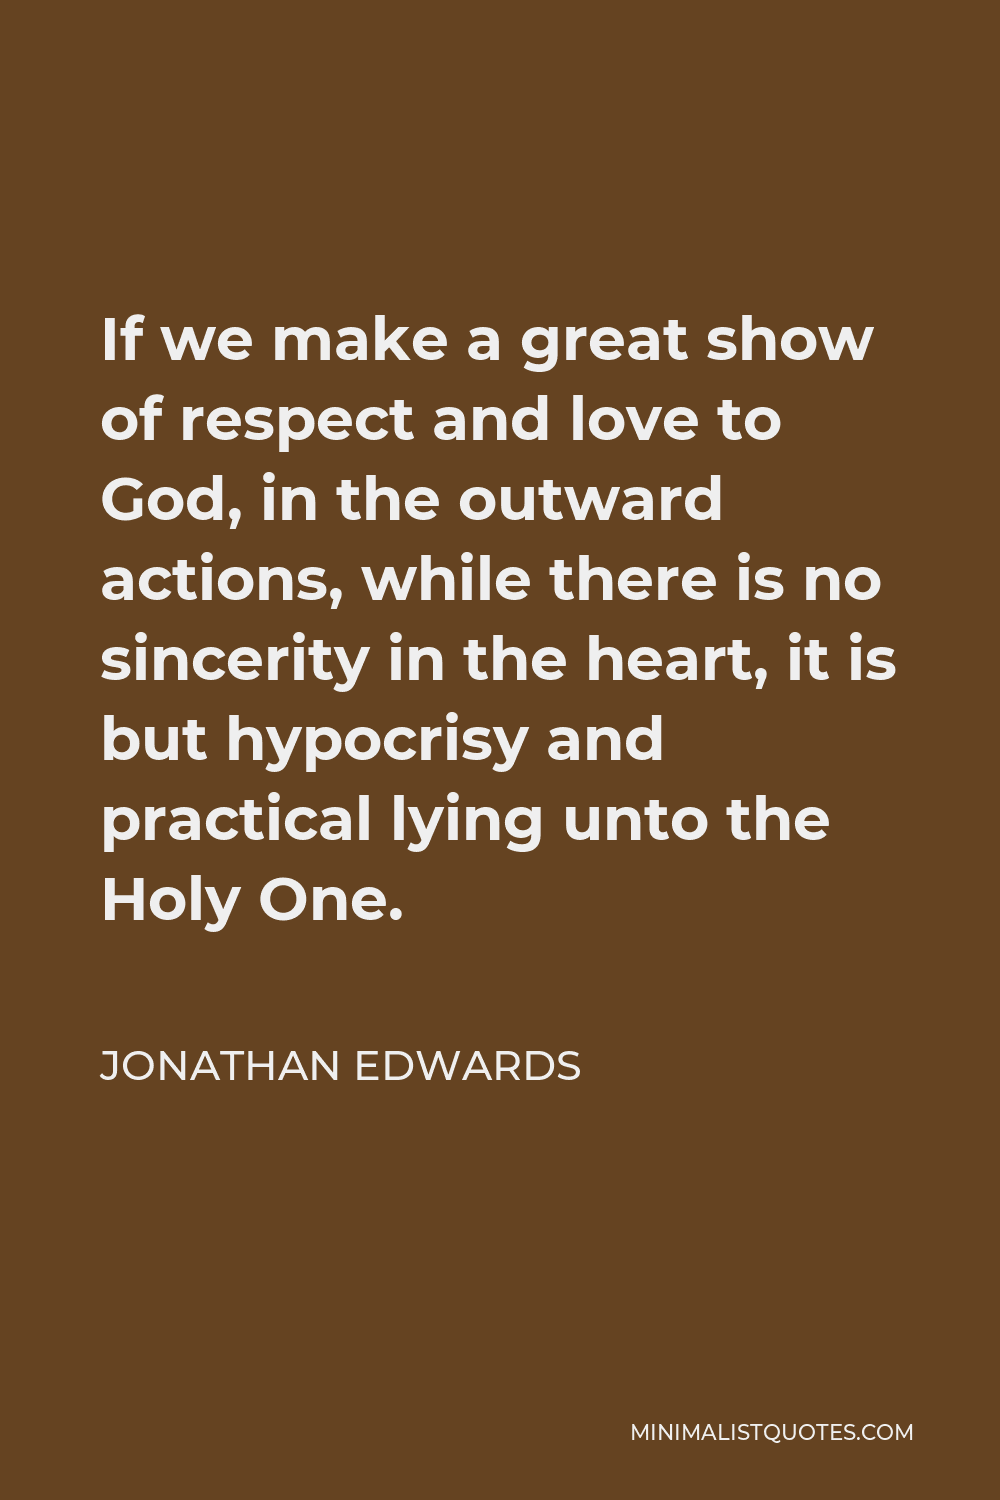 Jonathan Edwards Quote - If we make a great show of respect and love to God, in the outward actions, while there is no sincerity in the heart, it is but hypocrisy and practical lying unto the Holy One.